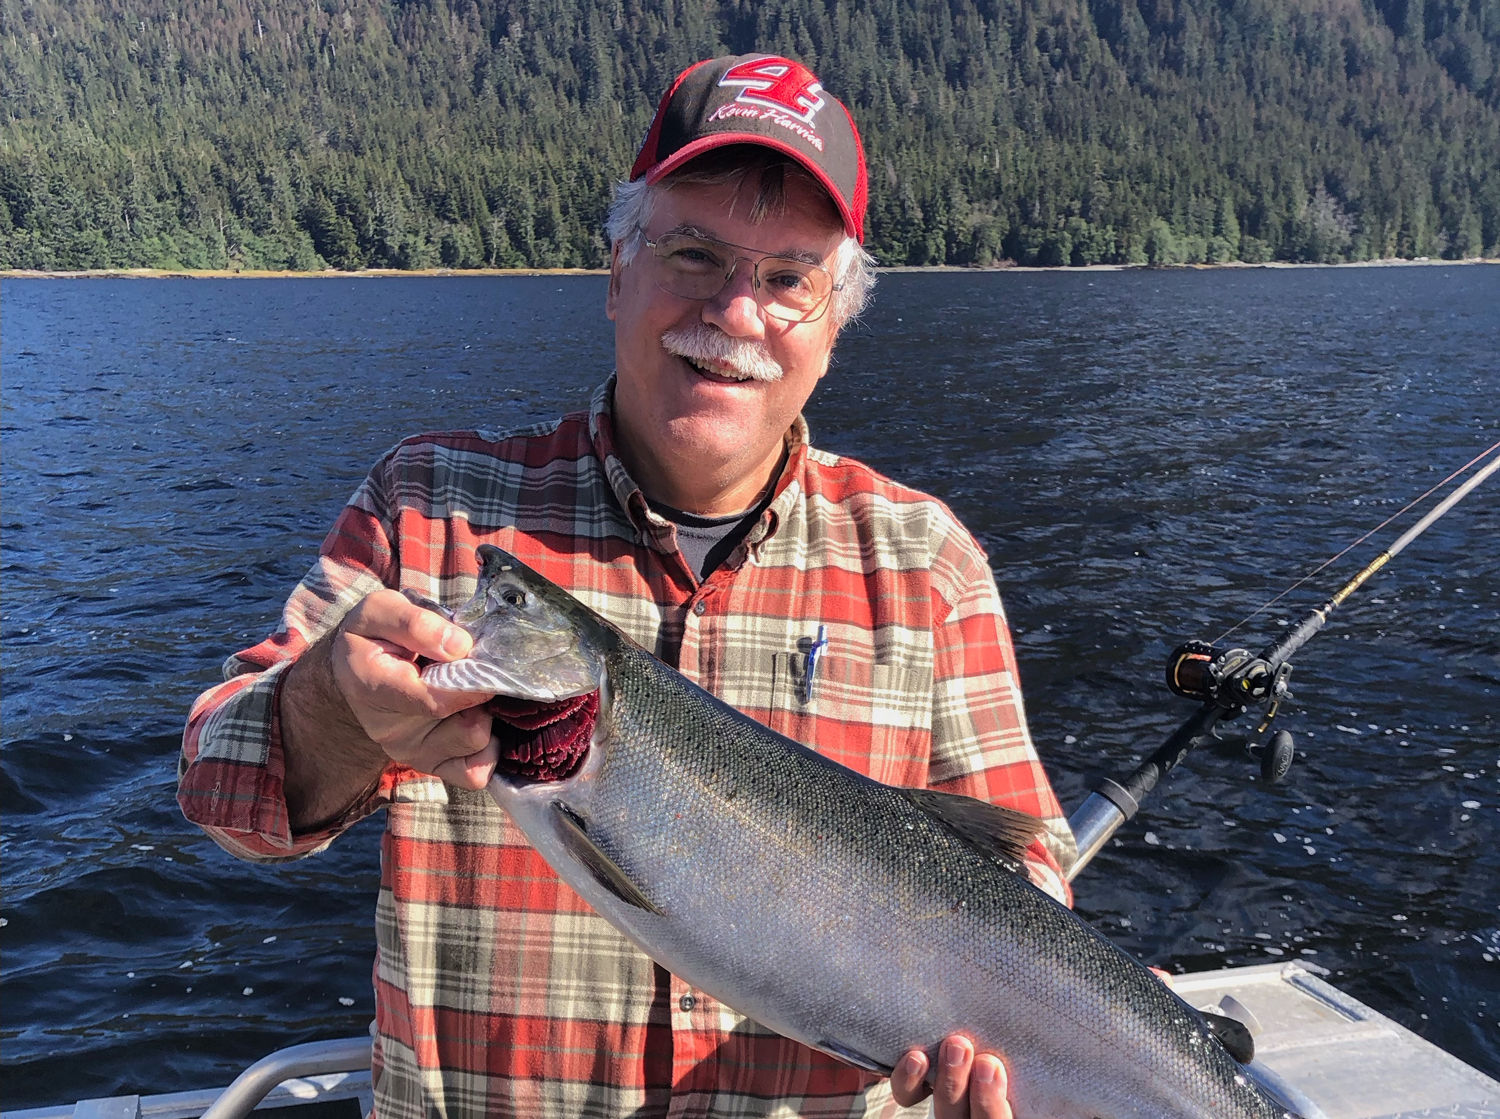 Jeff Ryan holding a Salmon while standing on the back of a fishing boat.